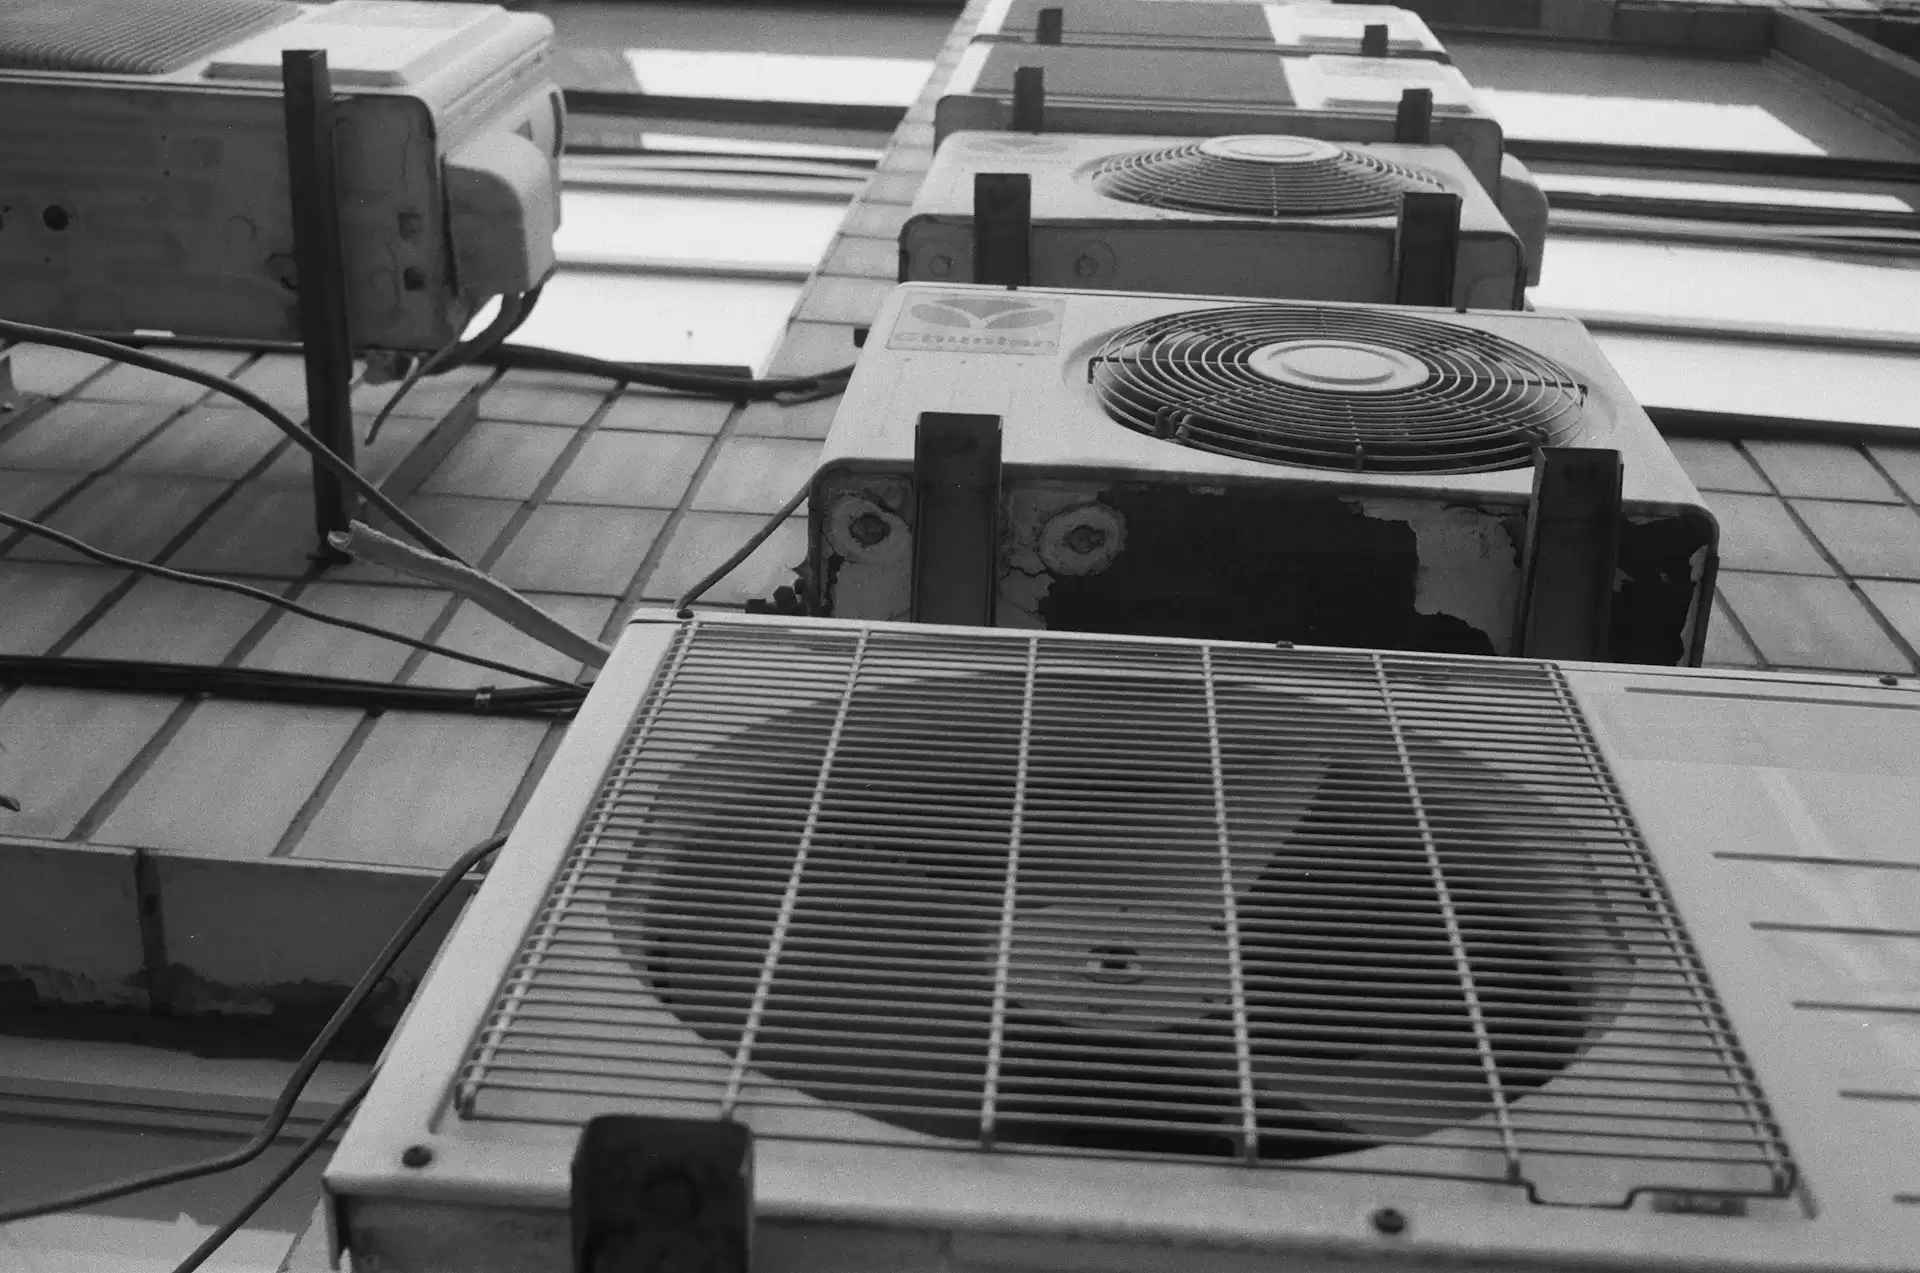 a series of AC units on a tiled floor